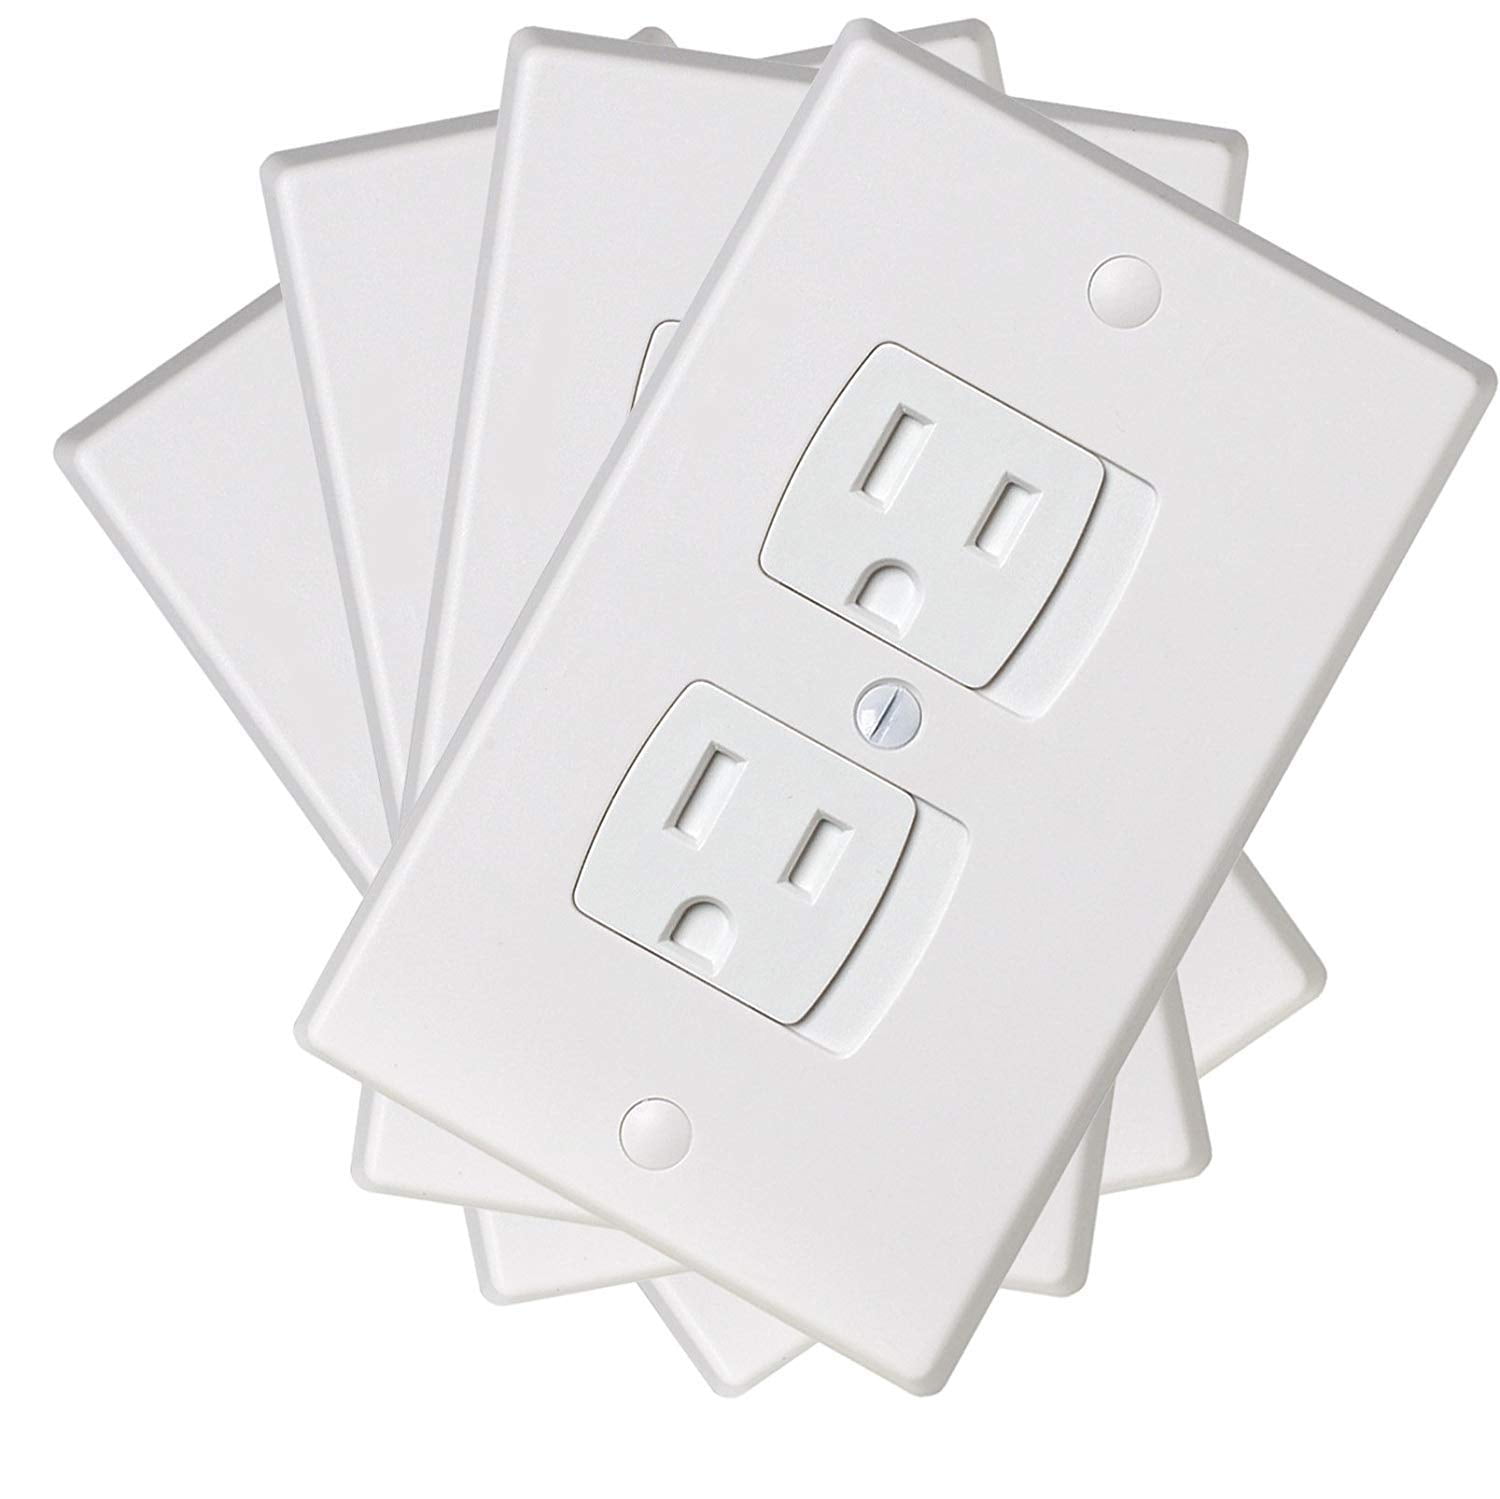 HAUCK PLUG ME SOCKET COVER PACK OF 20 PROTECTS AGAINST INJURIES HOME CHILD PROOF 